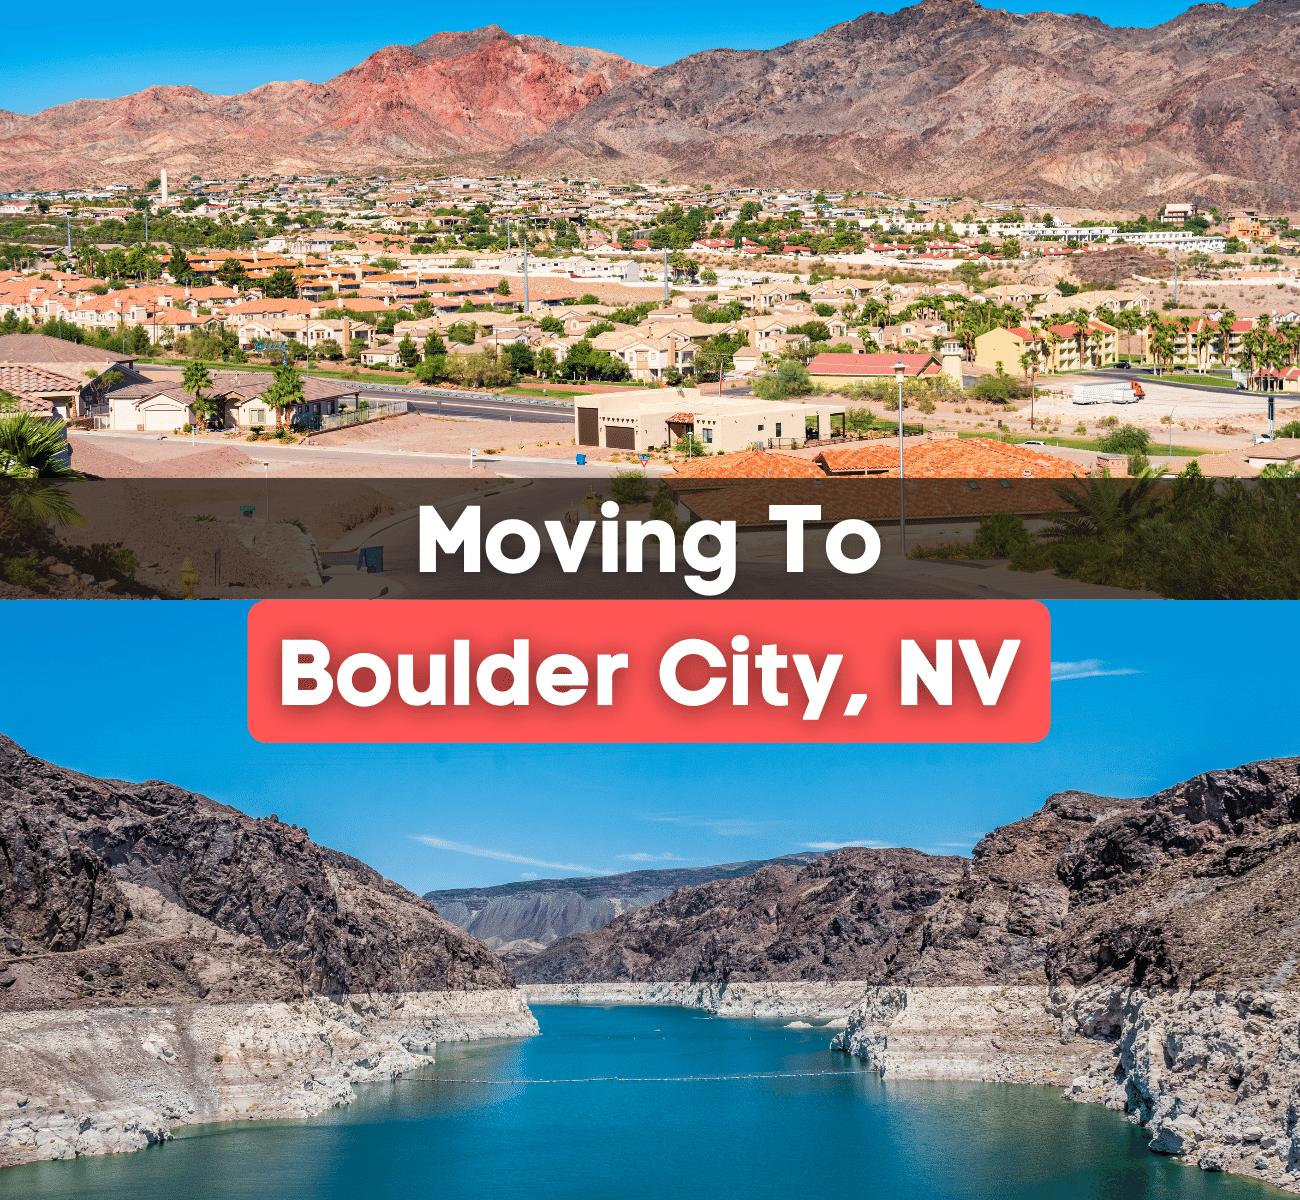 Boulder City, NV neighborhood and the Hoover Dam on a sunny day